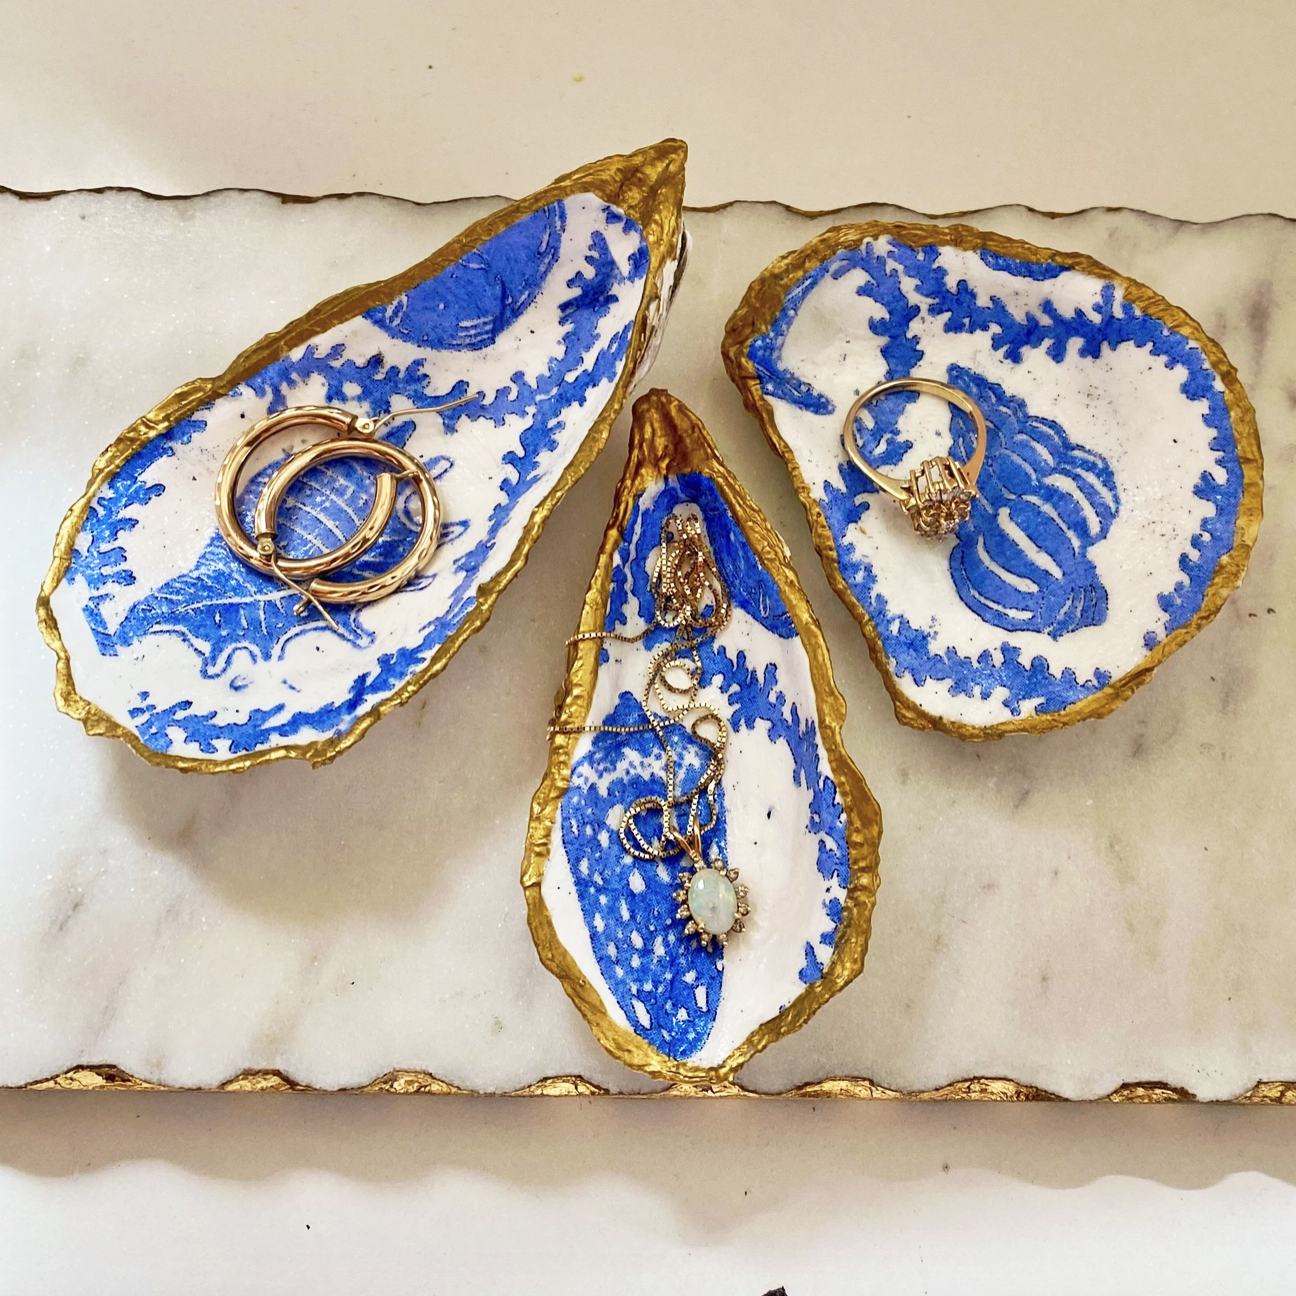 Del Mar Designs DC | Blue Seashell Print  Recycled Oyster Shell Jewelry Dish | Prelude & Dawn Los Angeles